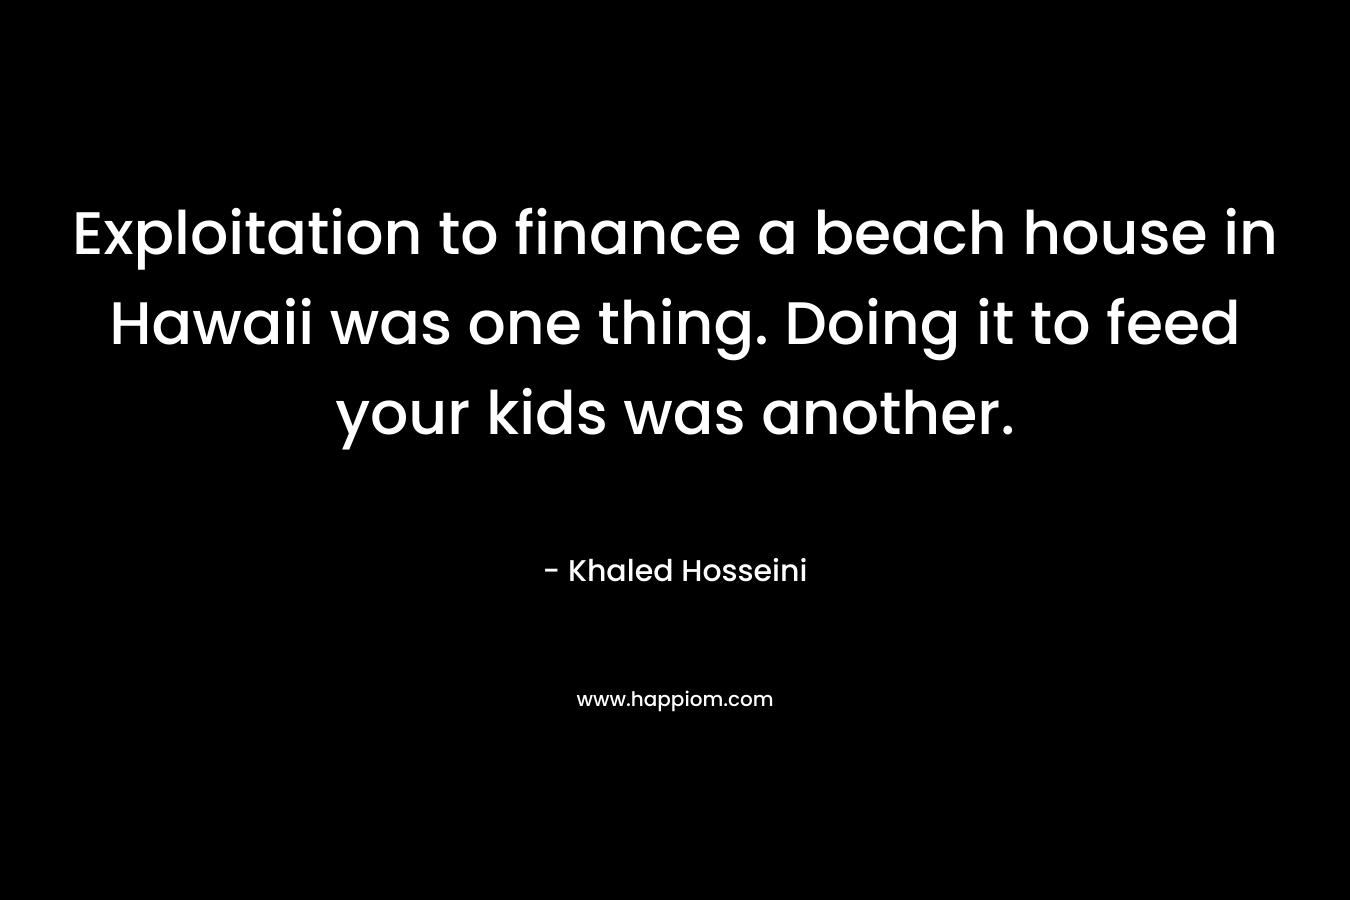 Exploitation to finance a beach house in Hawaii was one thing. Doing it to feed your kids was another. – Khaled Hosseini